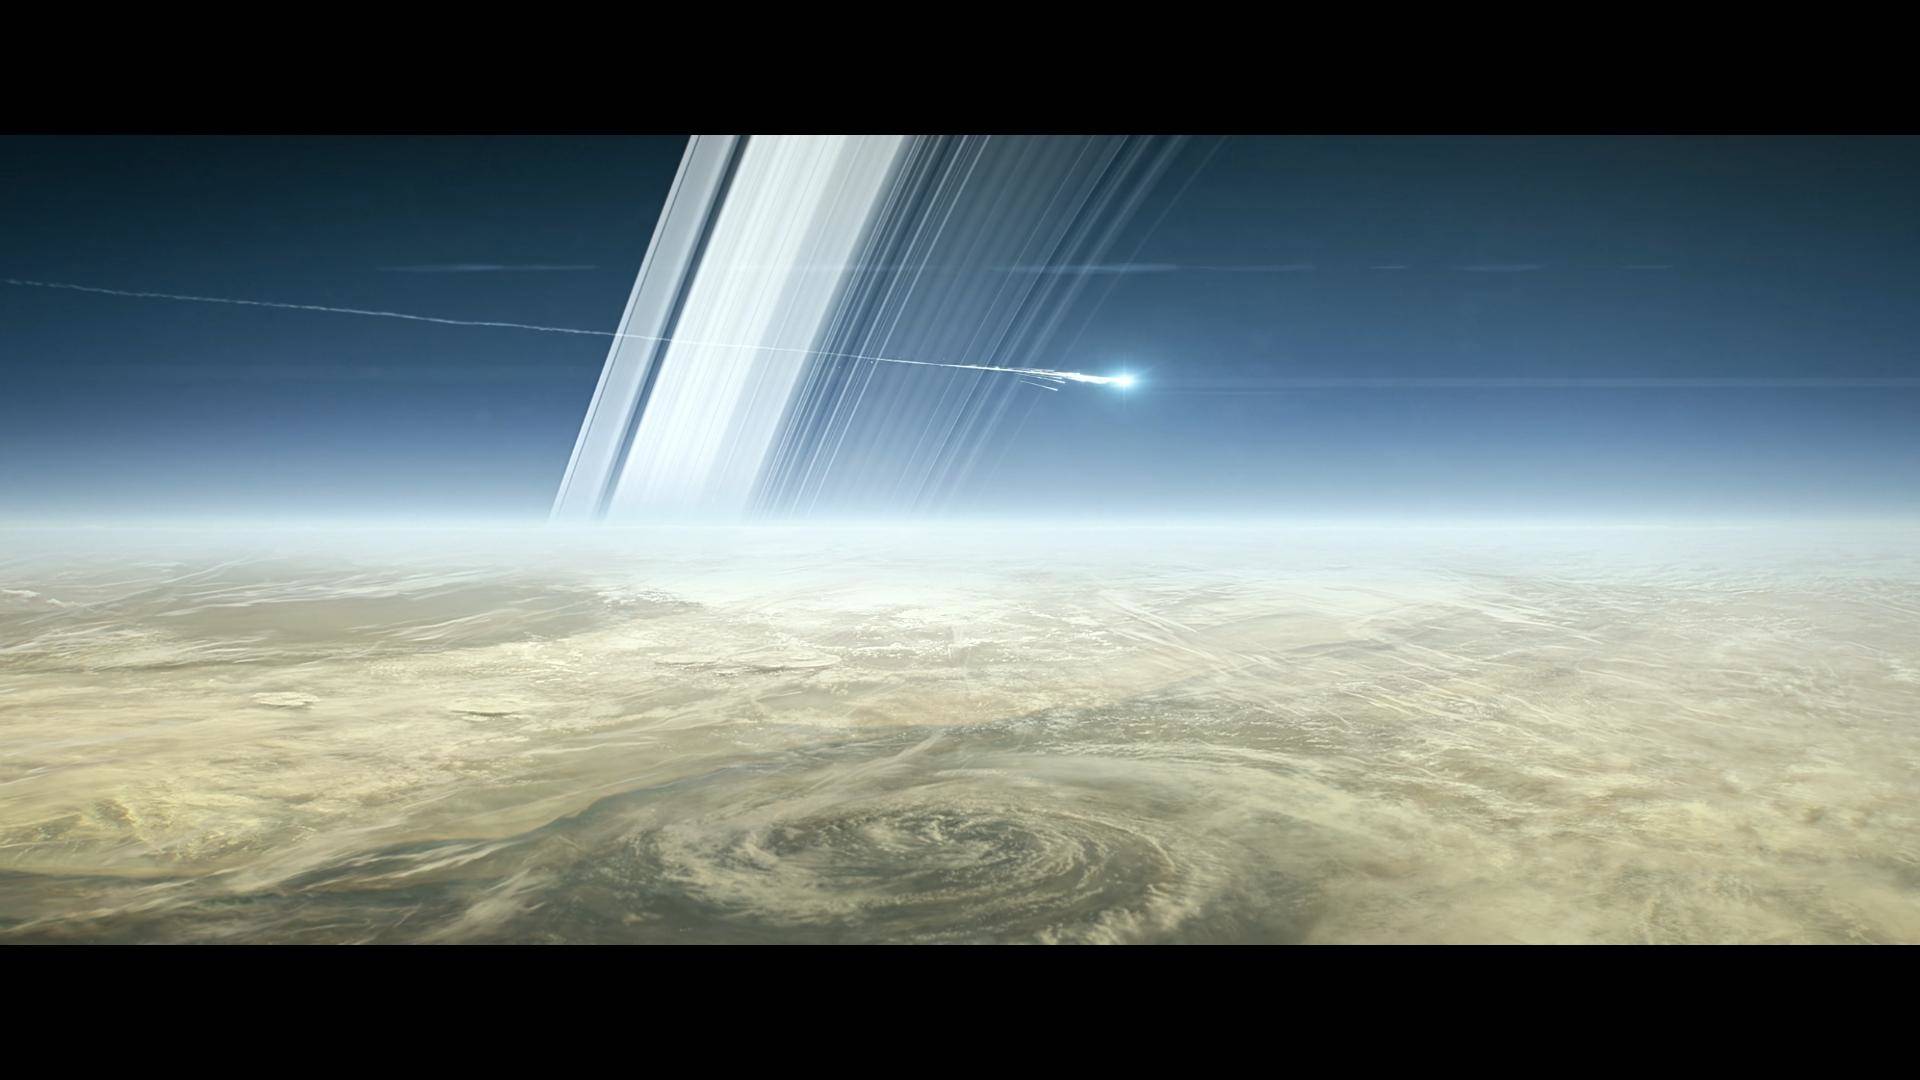 Artist concept of the Cassini spacecraft as it burned up in Saturn's atmosphere last Fall.  NASA/JPL-Caltech